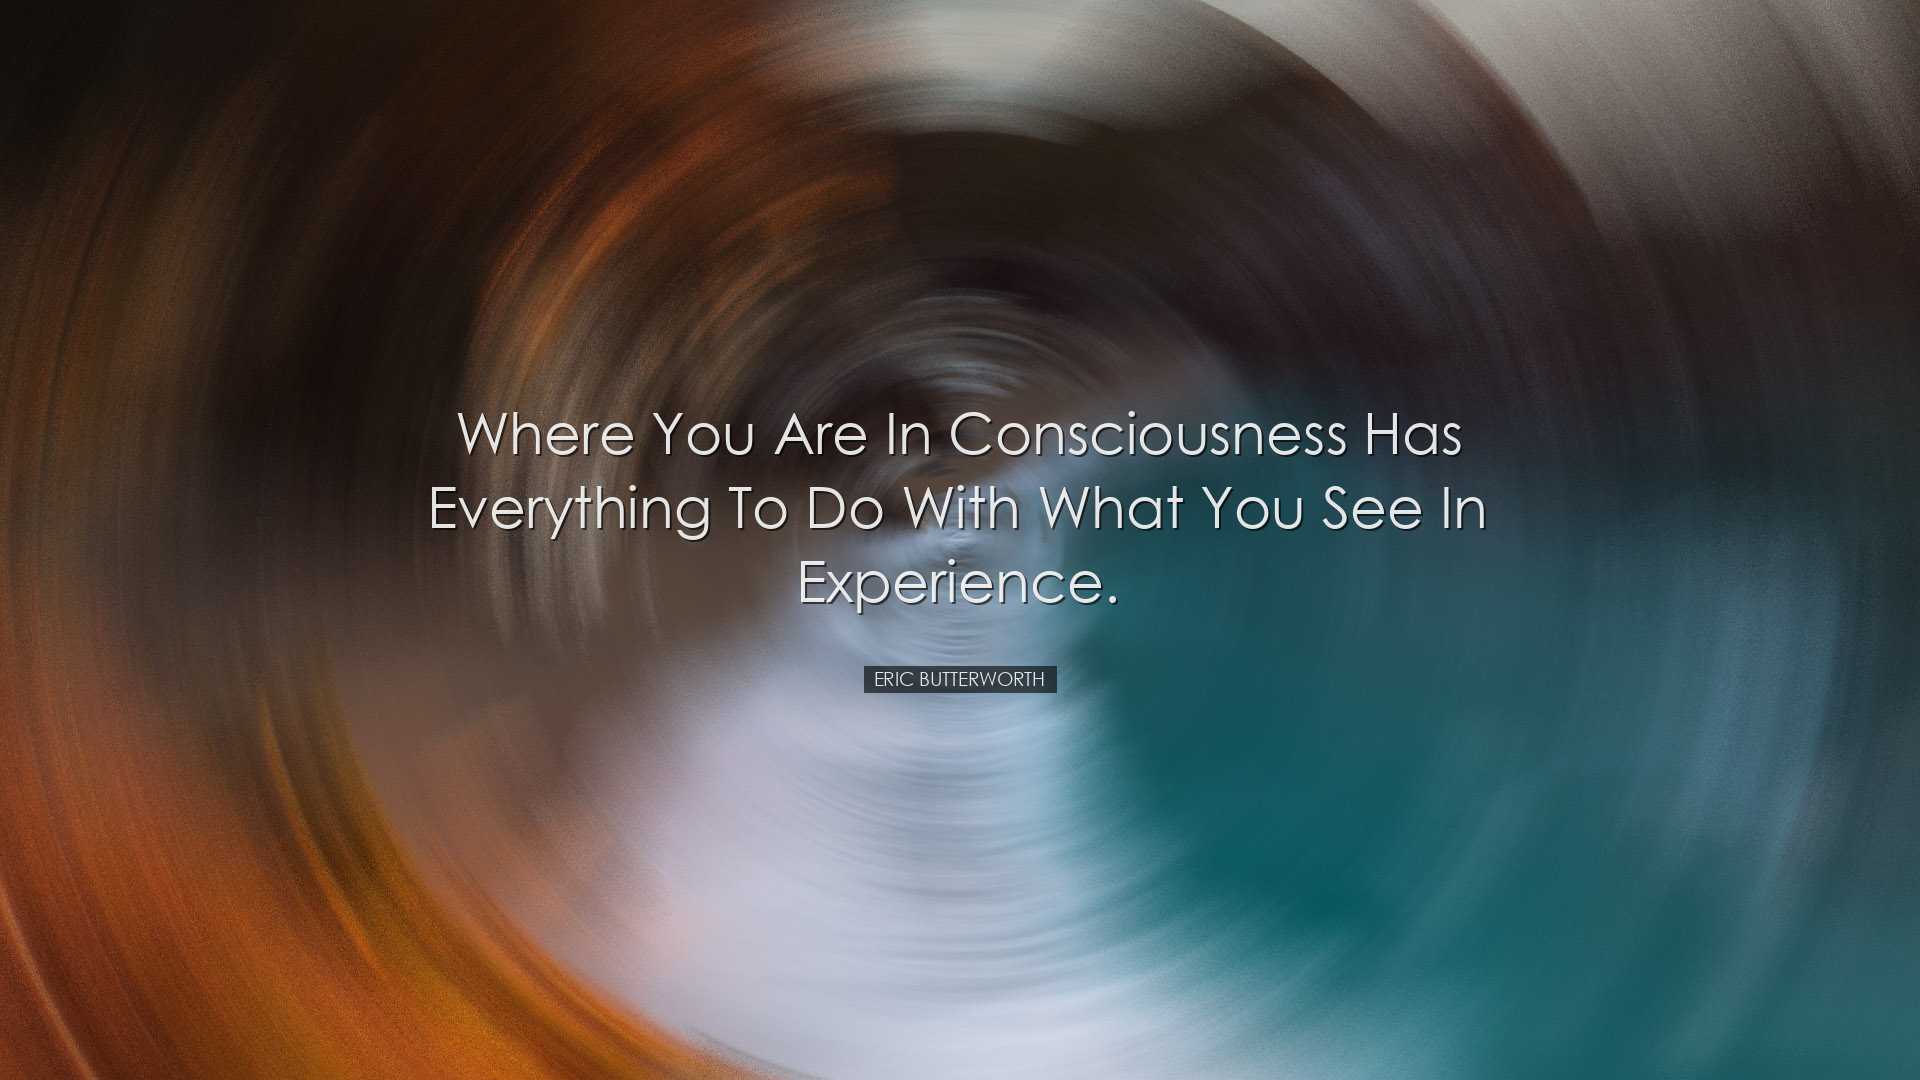 Where you are in consciousness has everything to do with what you